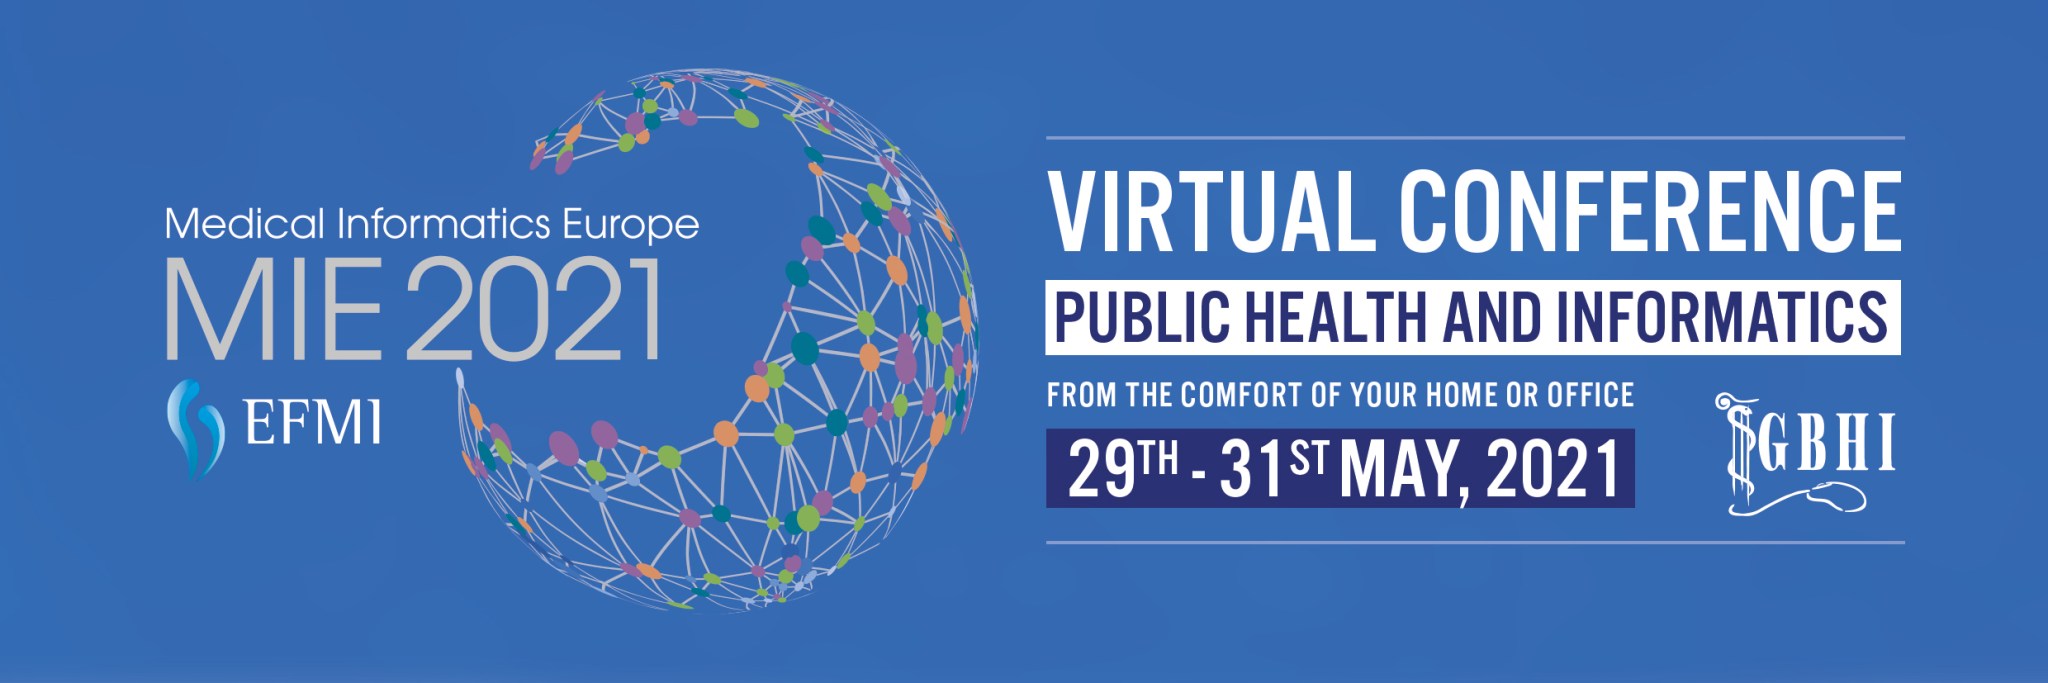 MIE 2021: 31ST MEDICAL INFORMATICS EUROPE CONFERENCE (#MIE2021)